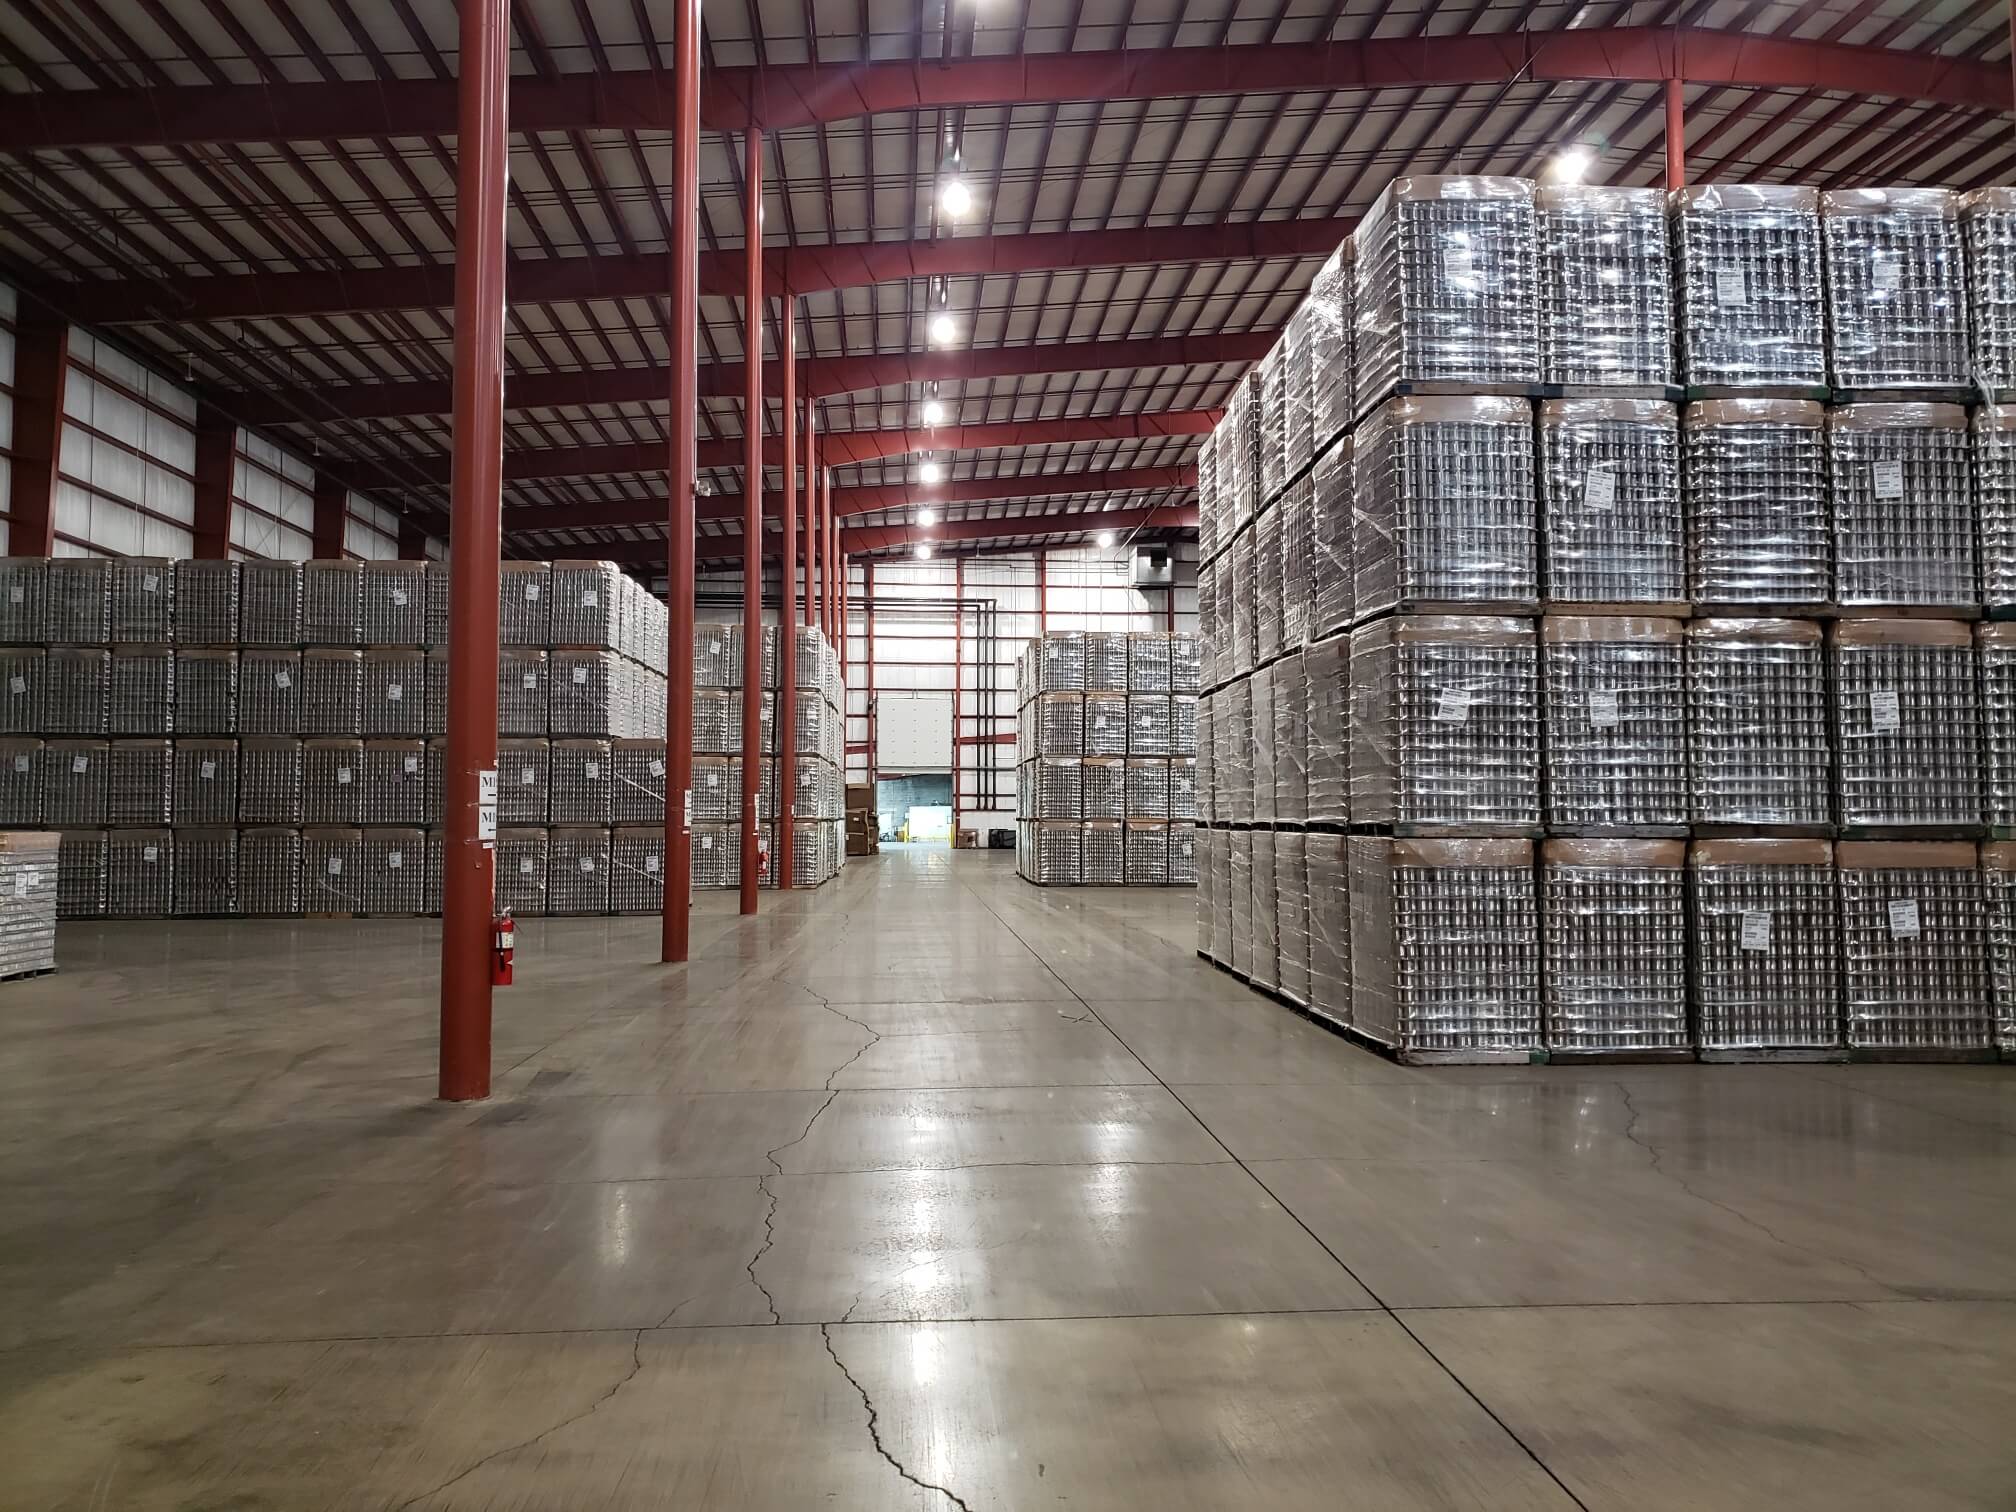 Food-grade storage in Friesland for business needing dry goods, materials, supplies stored for long-term and short-term bulk storage plans